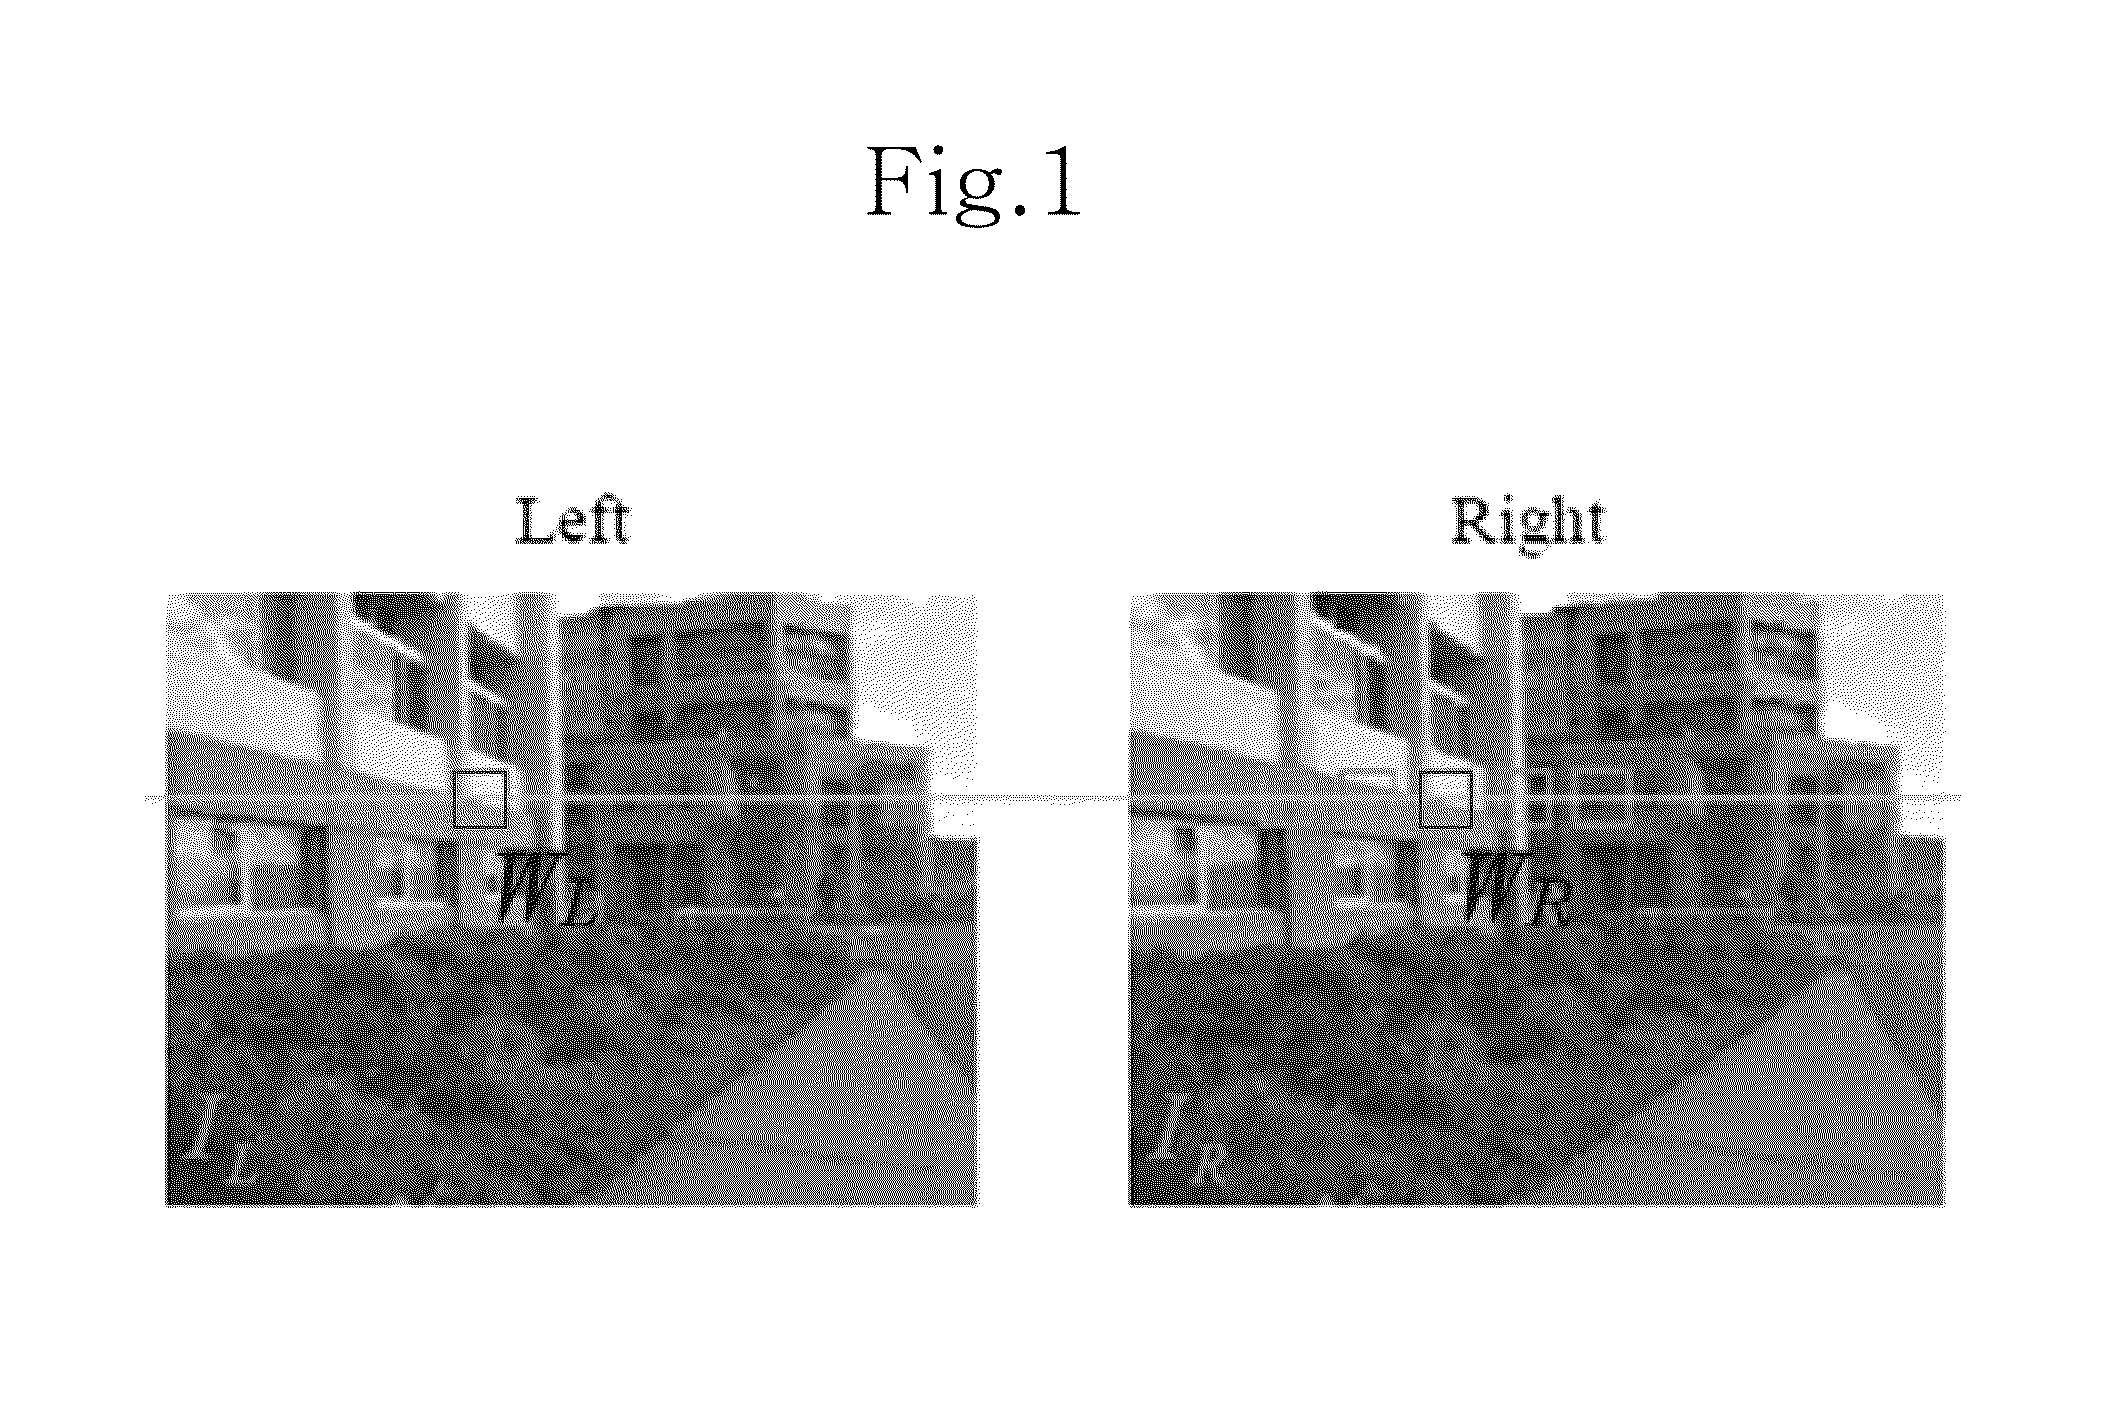 Stereo X-ray inspection apparatus and method for forming three-dimensional image through volume reconstruction of image acquired from the same